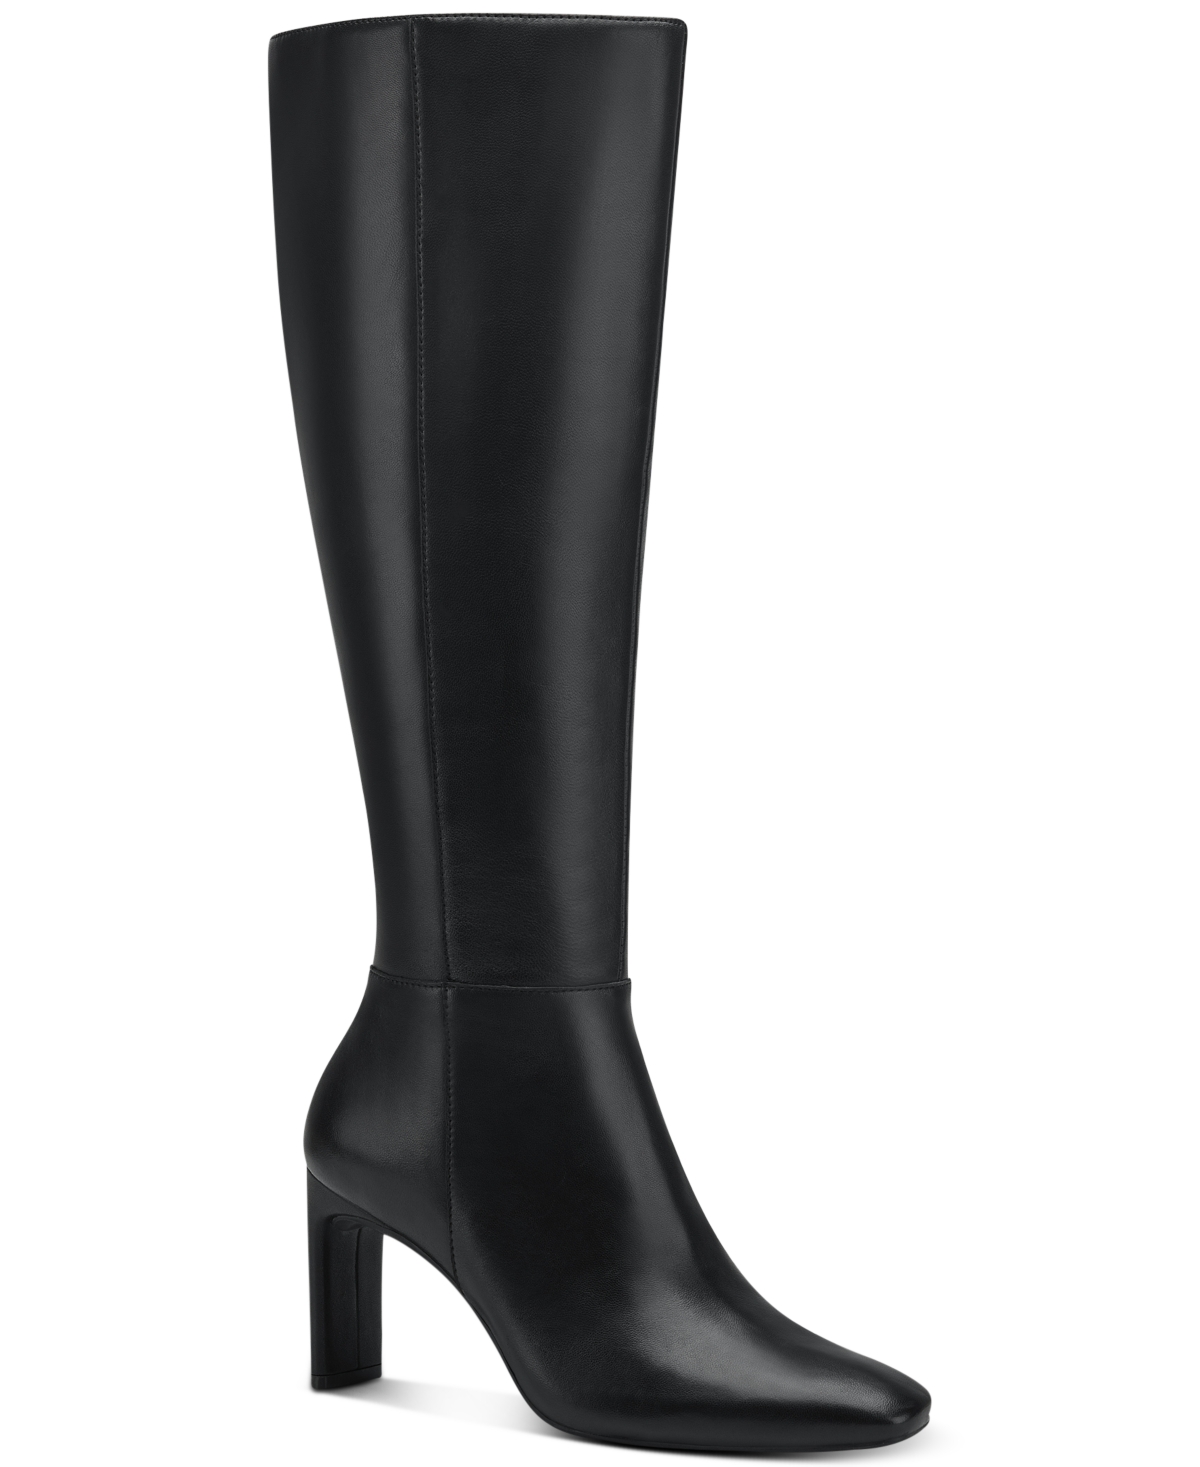 ALFANI WOMEN'S TRISTANNE WIDE-CALF KNEE HIGH DRESS BOOTS, CREATED FOR MACY'S